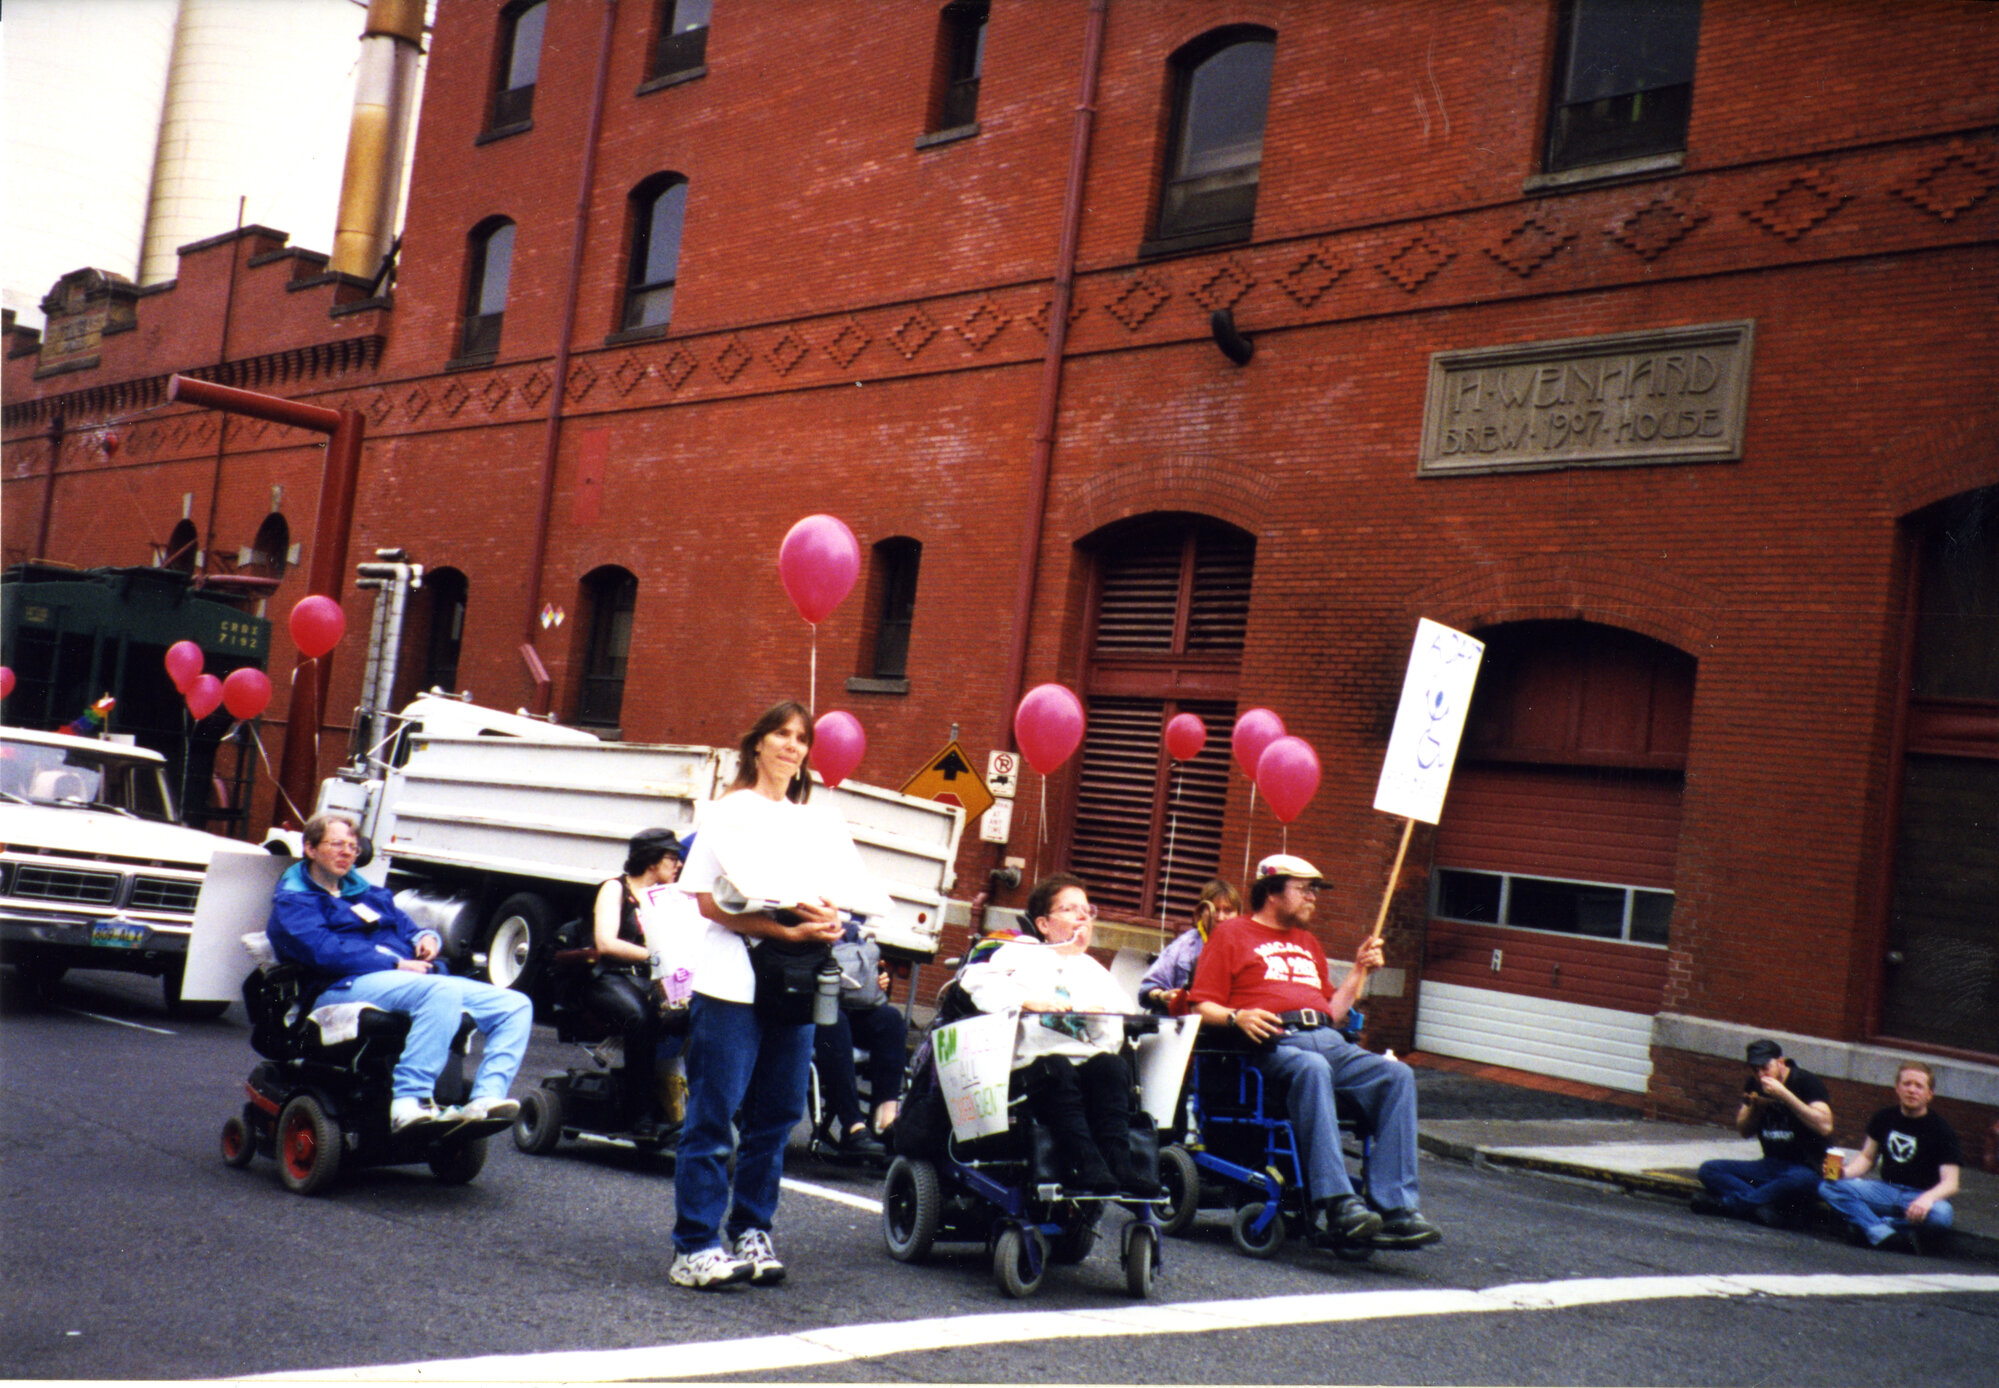 Laura Hershey and other activists at Portland LGBTQ Pride Parade, 1999